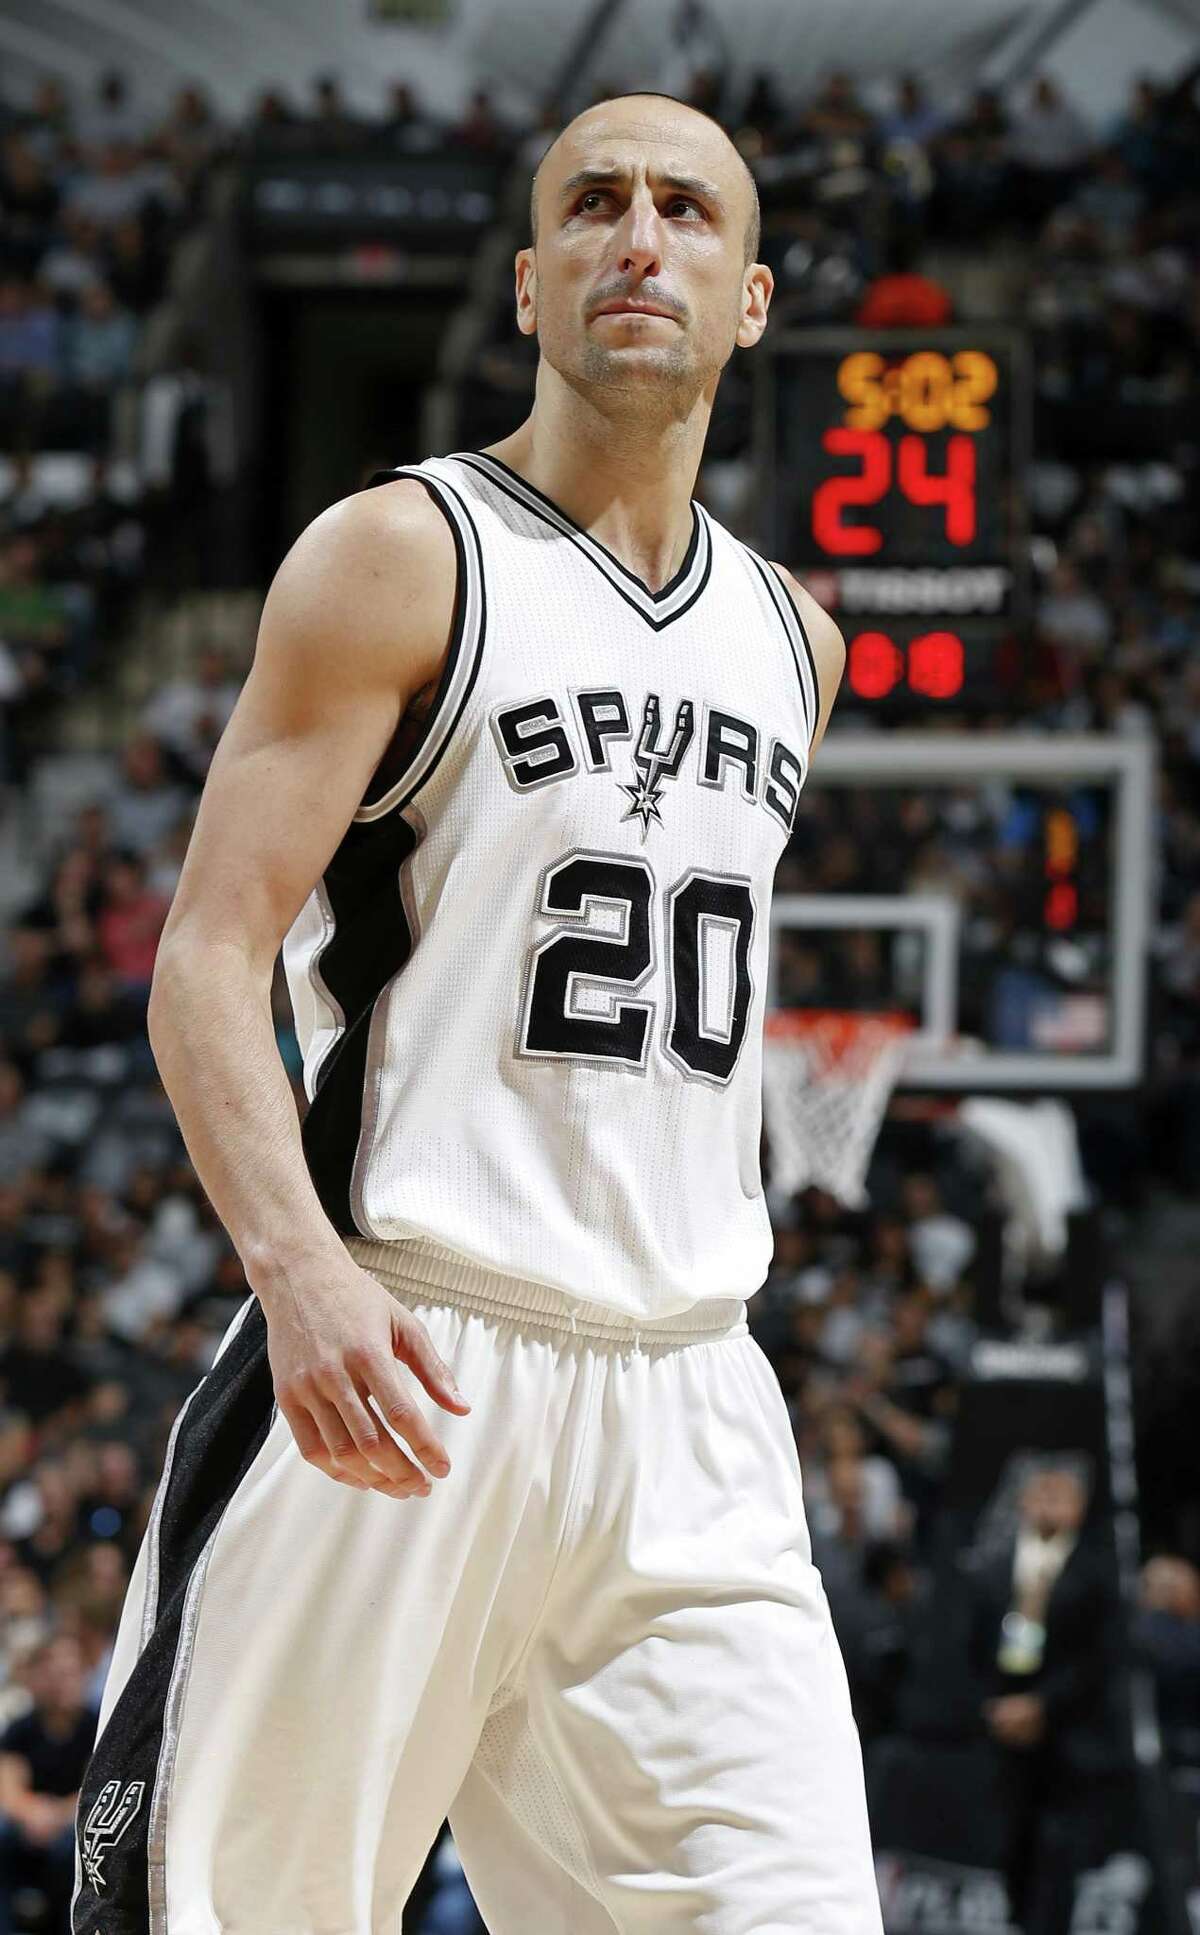 Spurs’ Manu Ginobili pauses during first half action of Game 2 in the first round of the Western Conference playoffs against the Memphis Grizzlies on April 17, 2017 at the AT&T Center.